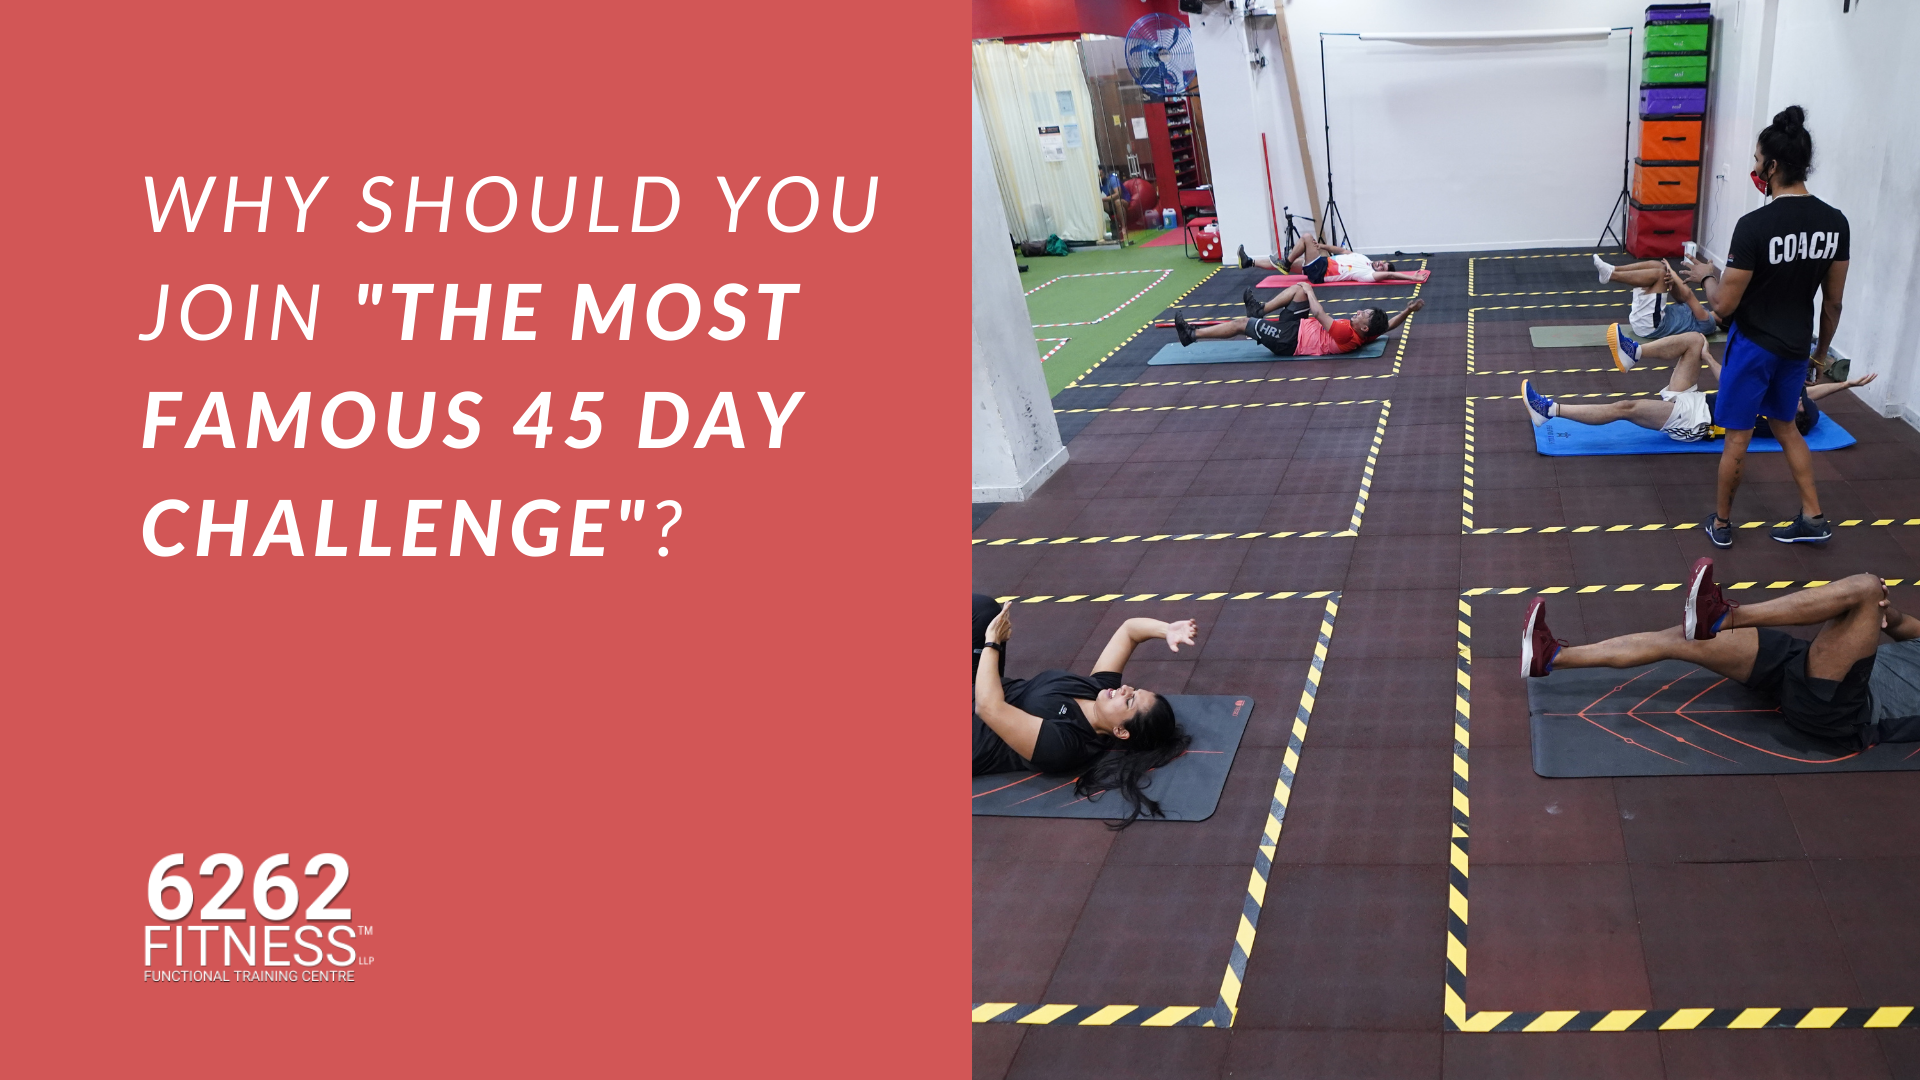 Why should you join “The Most Famous 45 Day Challenge”?